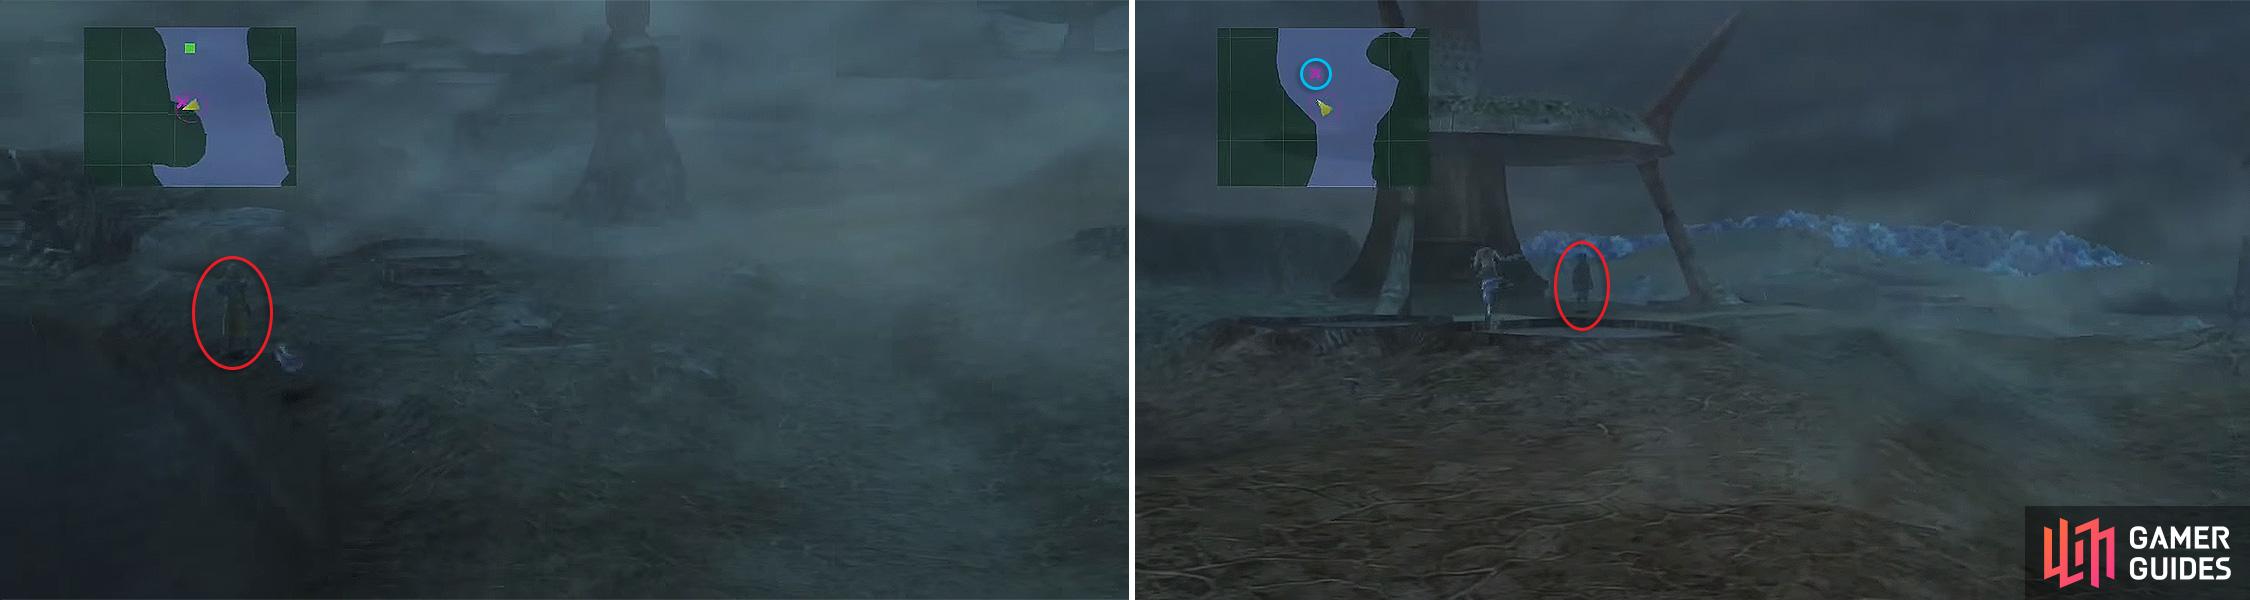 Look out for Cid (left) and the Ronso kids (right) both marked by the red X on your minimap.